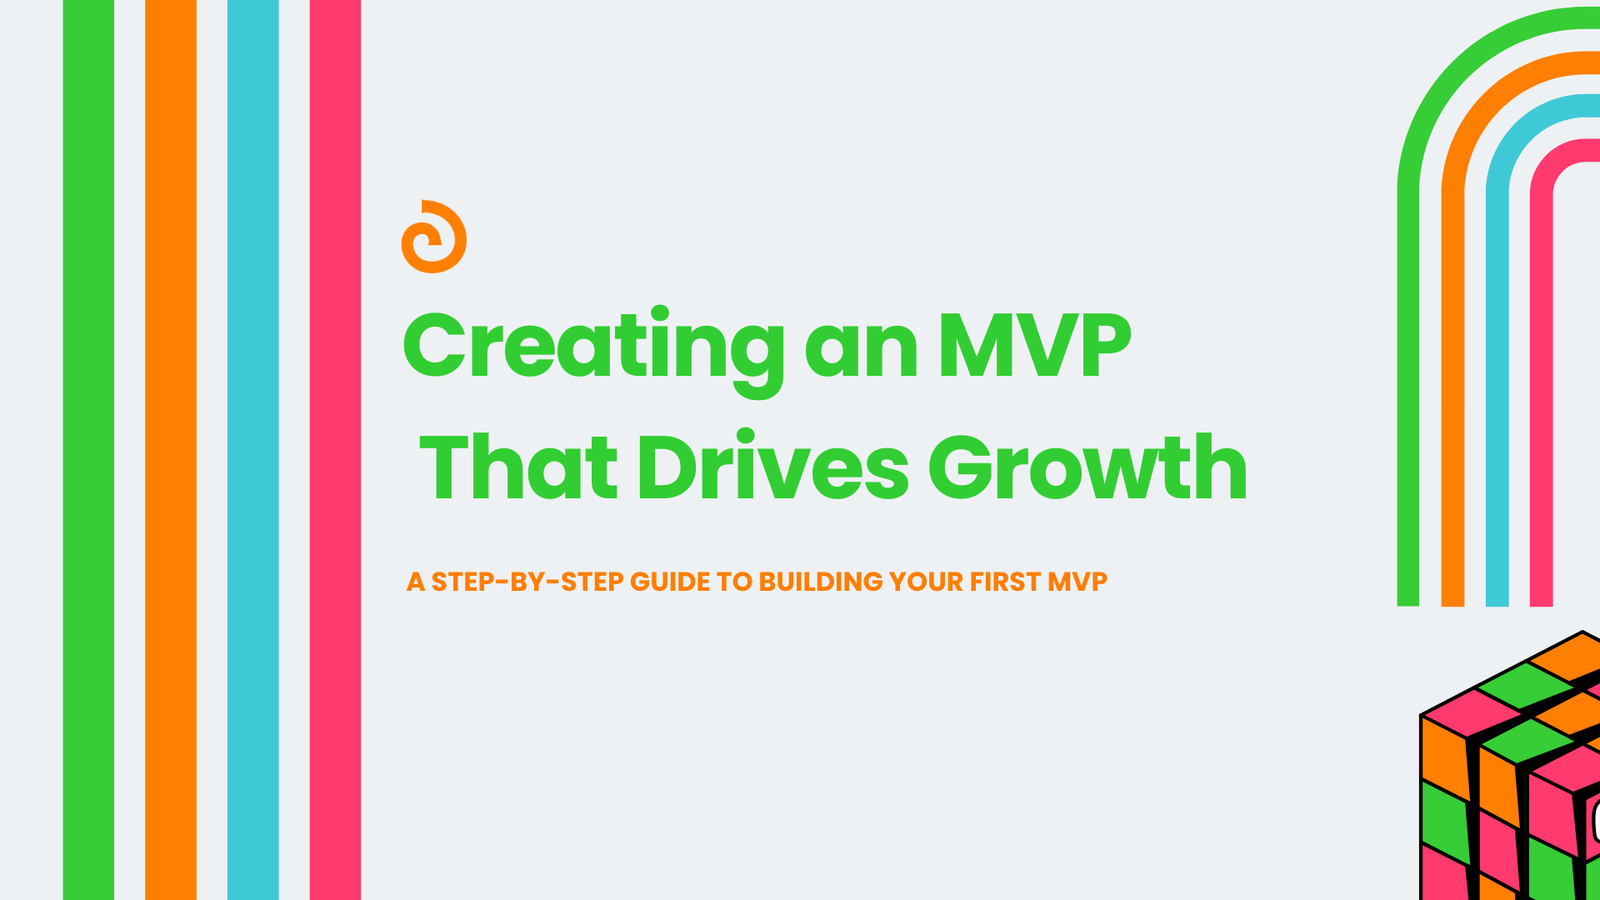 Creating an MVP That Drives Growth: A Step-by-Step Guide to Building Your First MVP